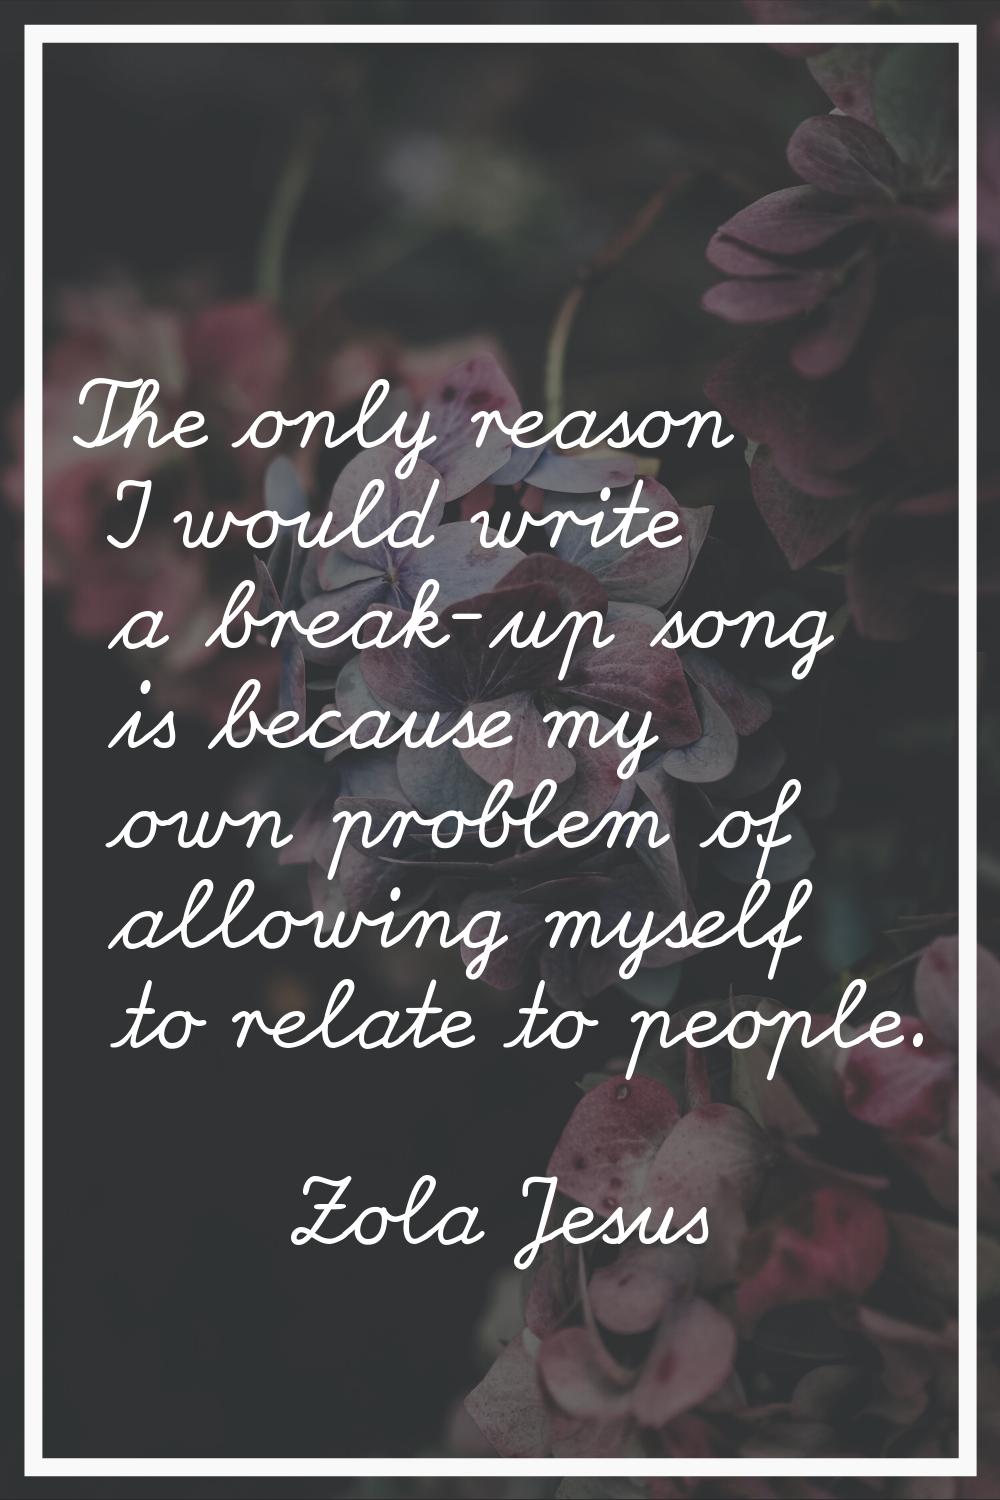 The only reason I would write a break-up song is because my own problem of allowing myself to relat